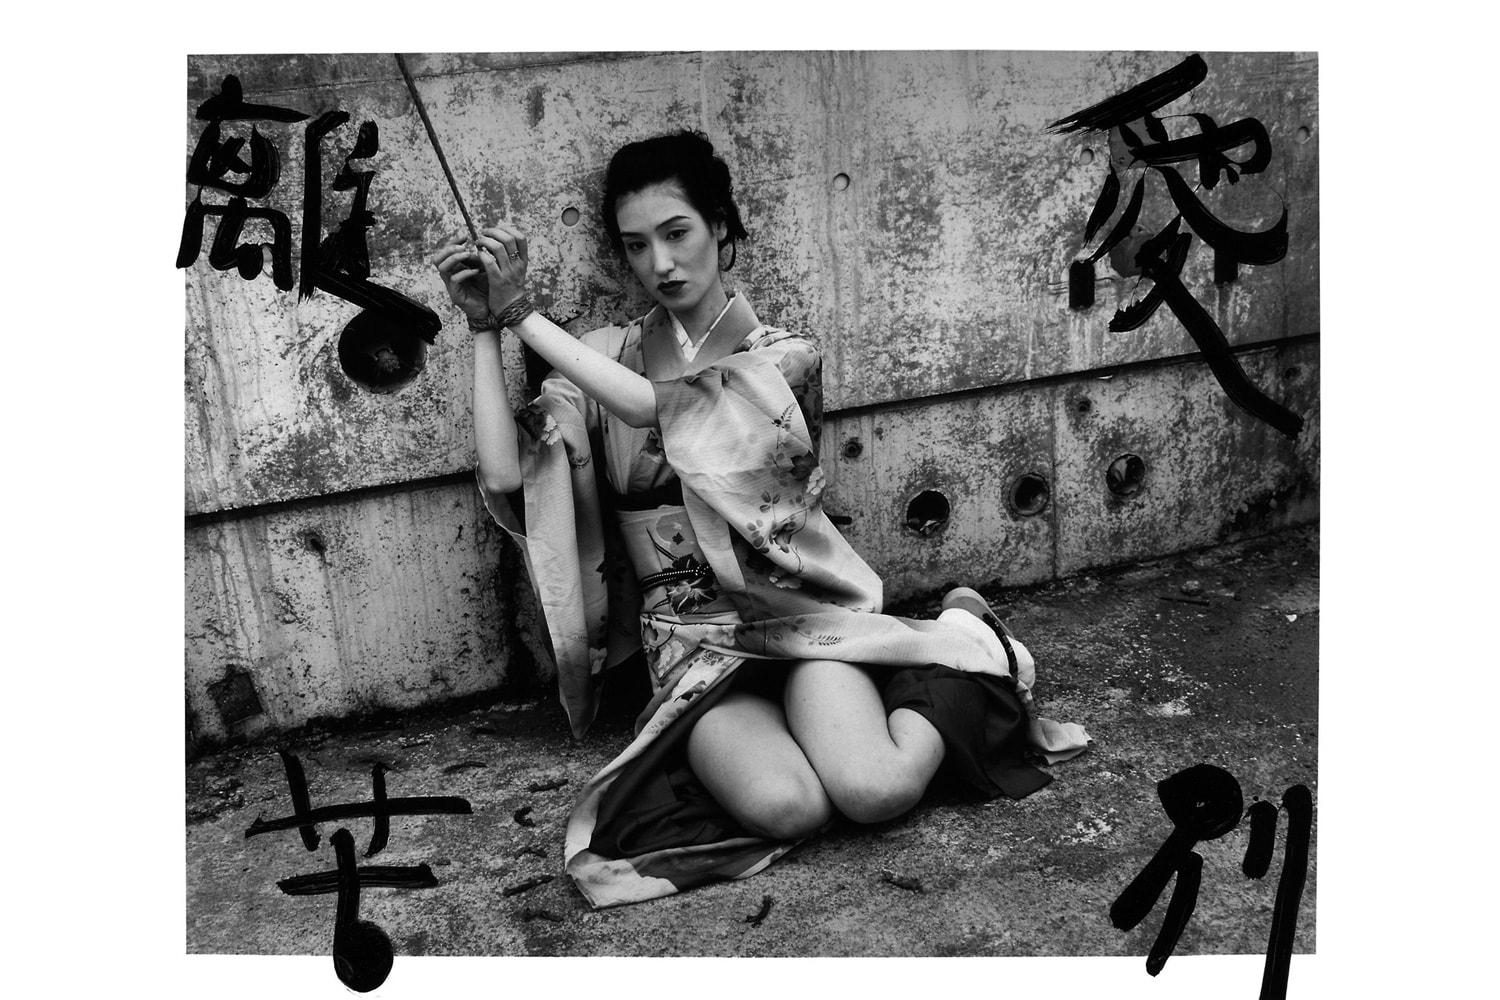 1940s Jap - 8 Facts You Need to Know About Nobuyoshi Araki | Hypebeast